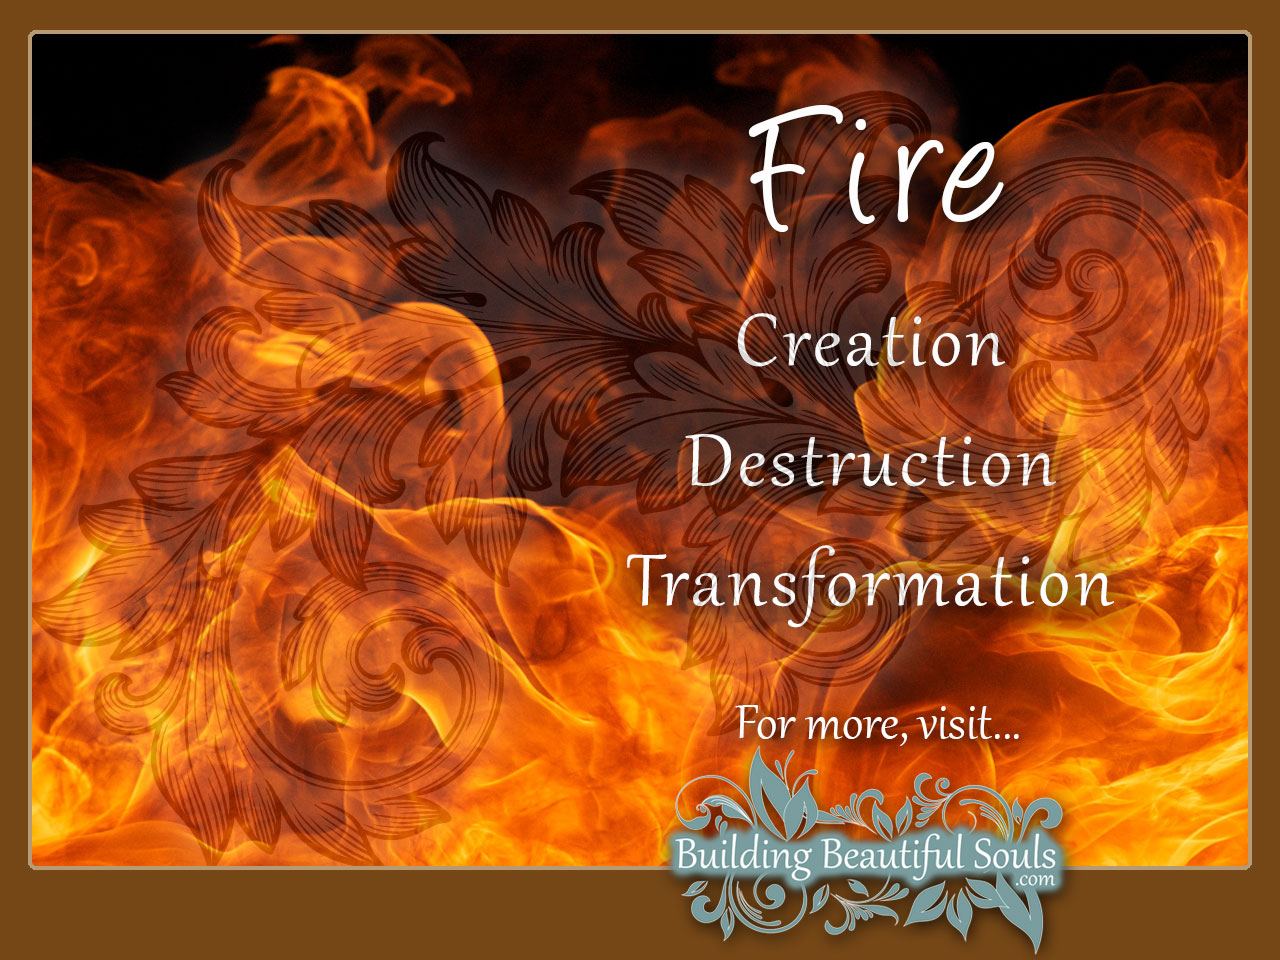 What are the five elements of fire?